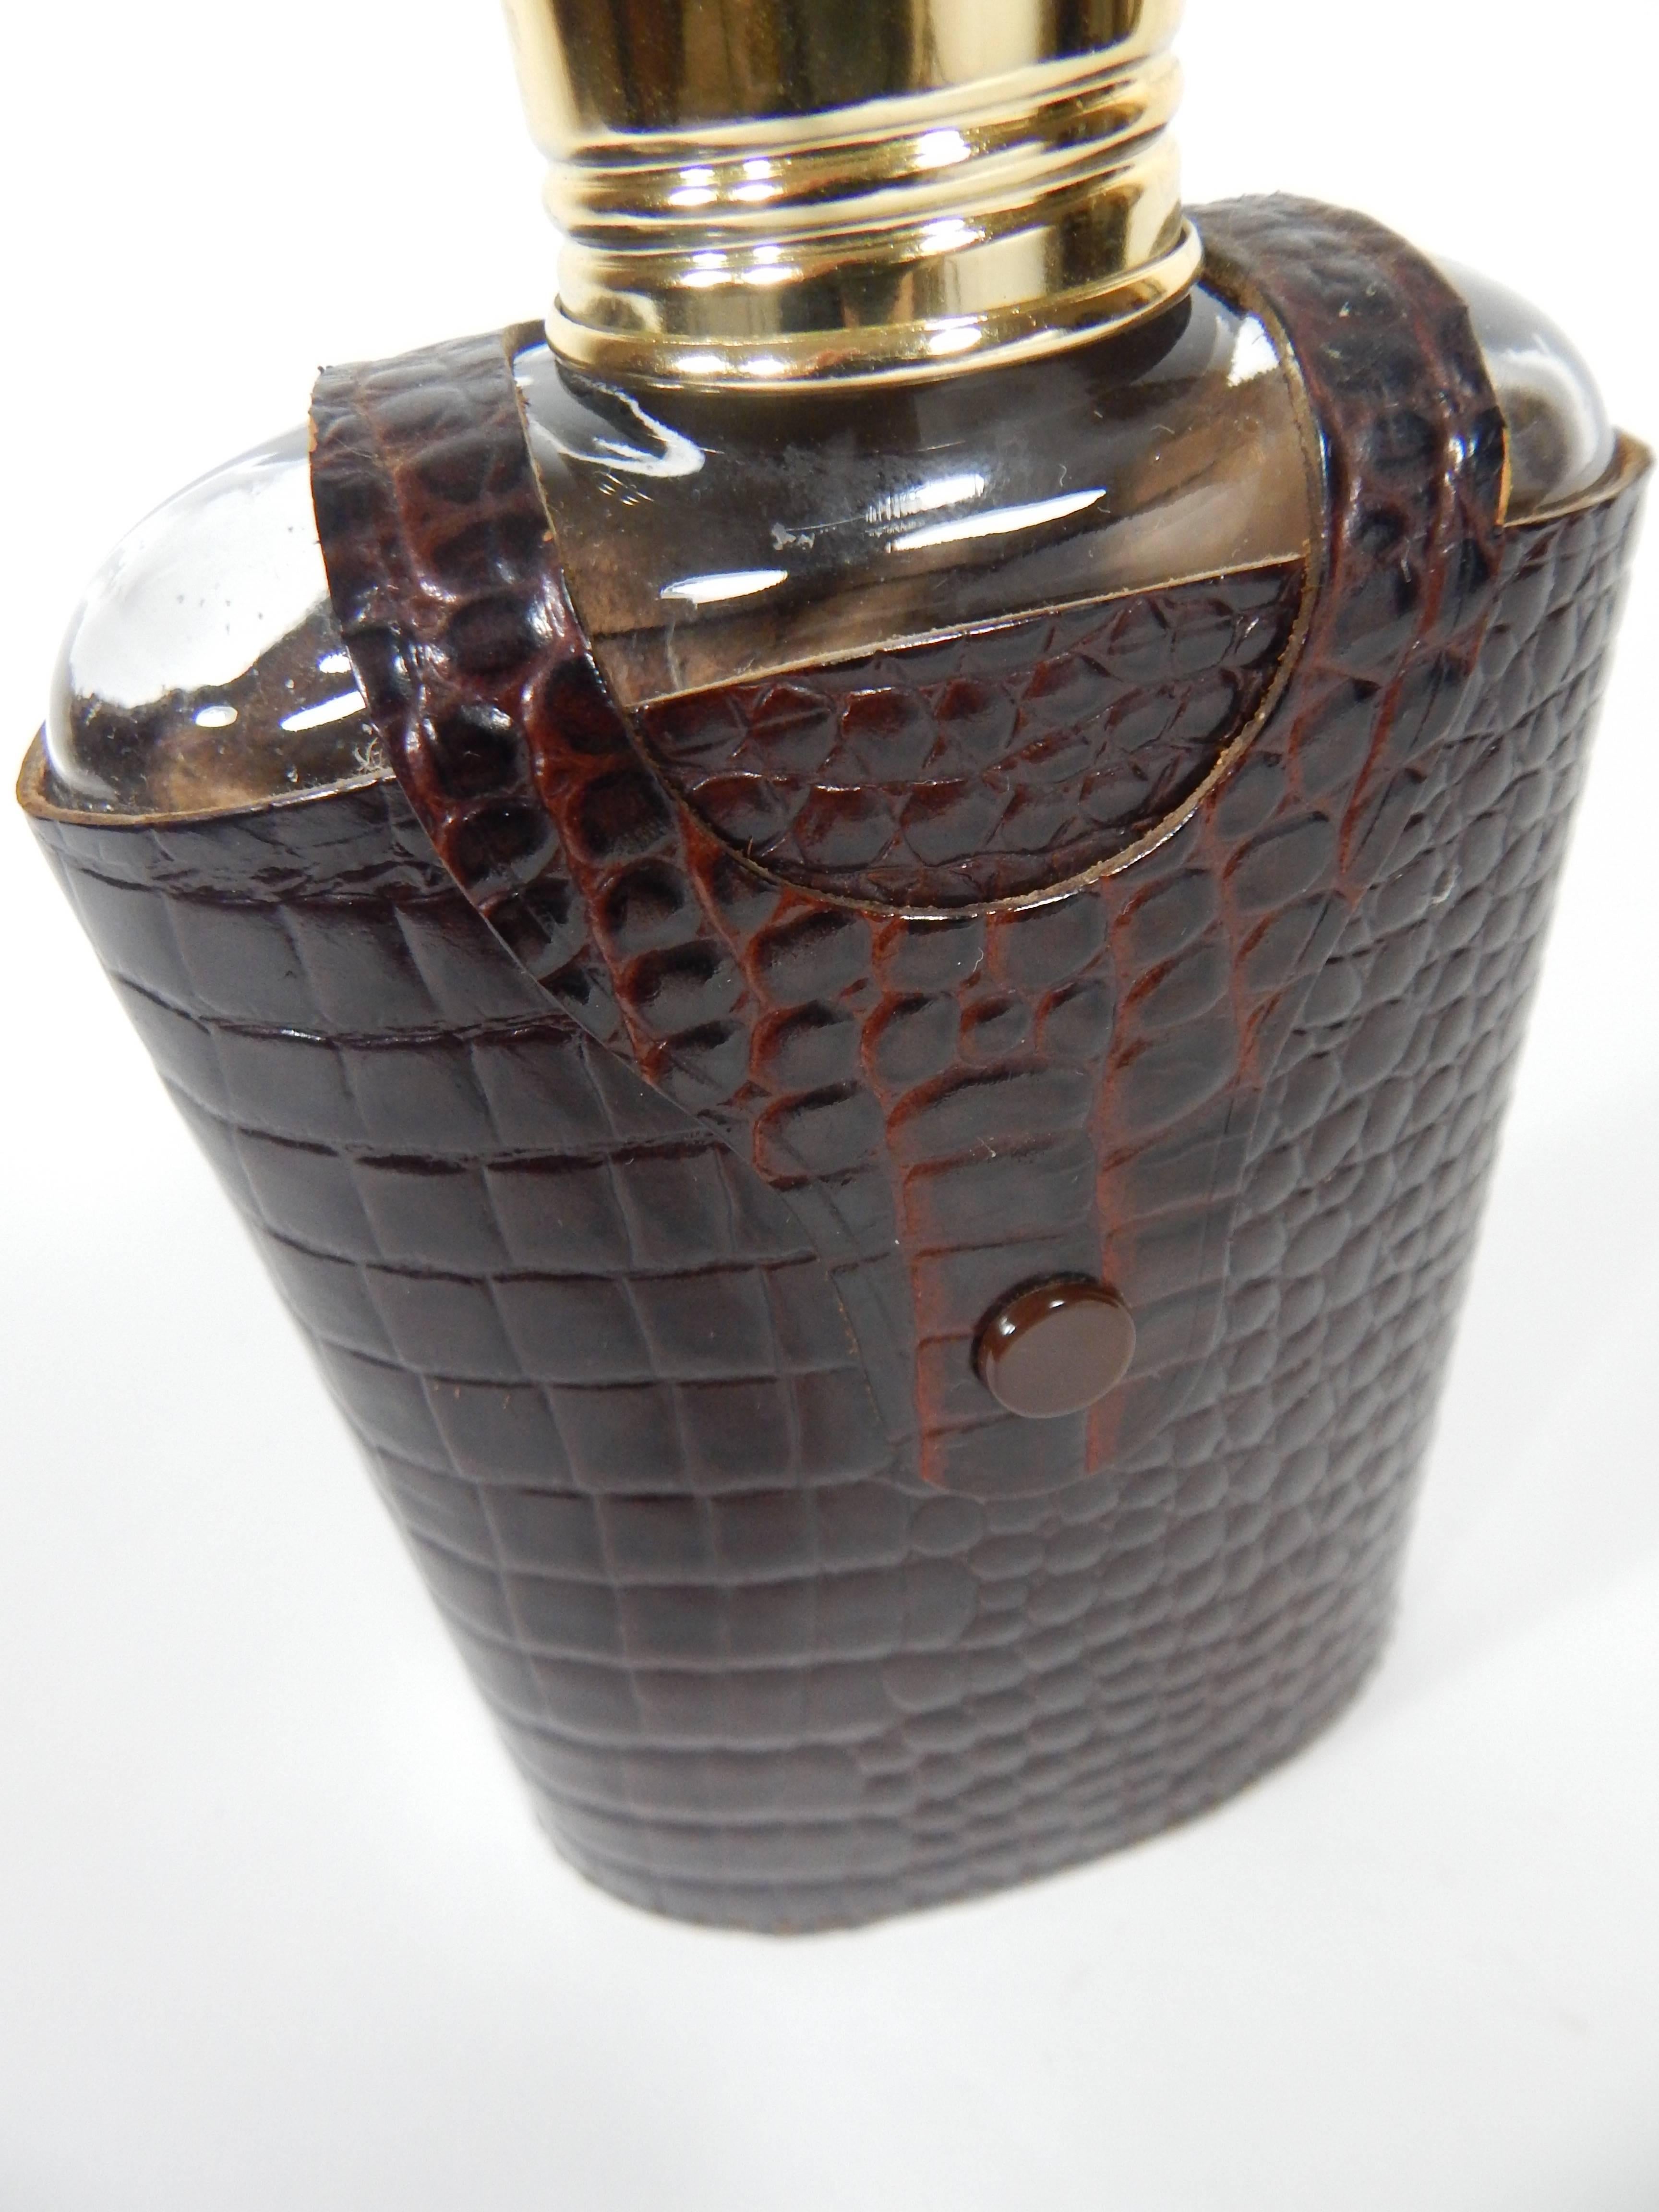 Flask in a chocolate brown Croc embossed leather with stitching. Leather case is stamped Croc Grain Hide, Made in England. The snap fastener reads Hewey England. There is a screw-on cap, and an additional screw-on lid that also works as a shot